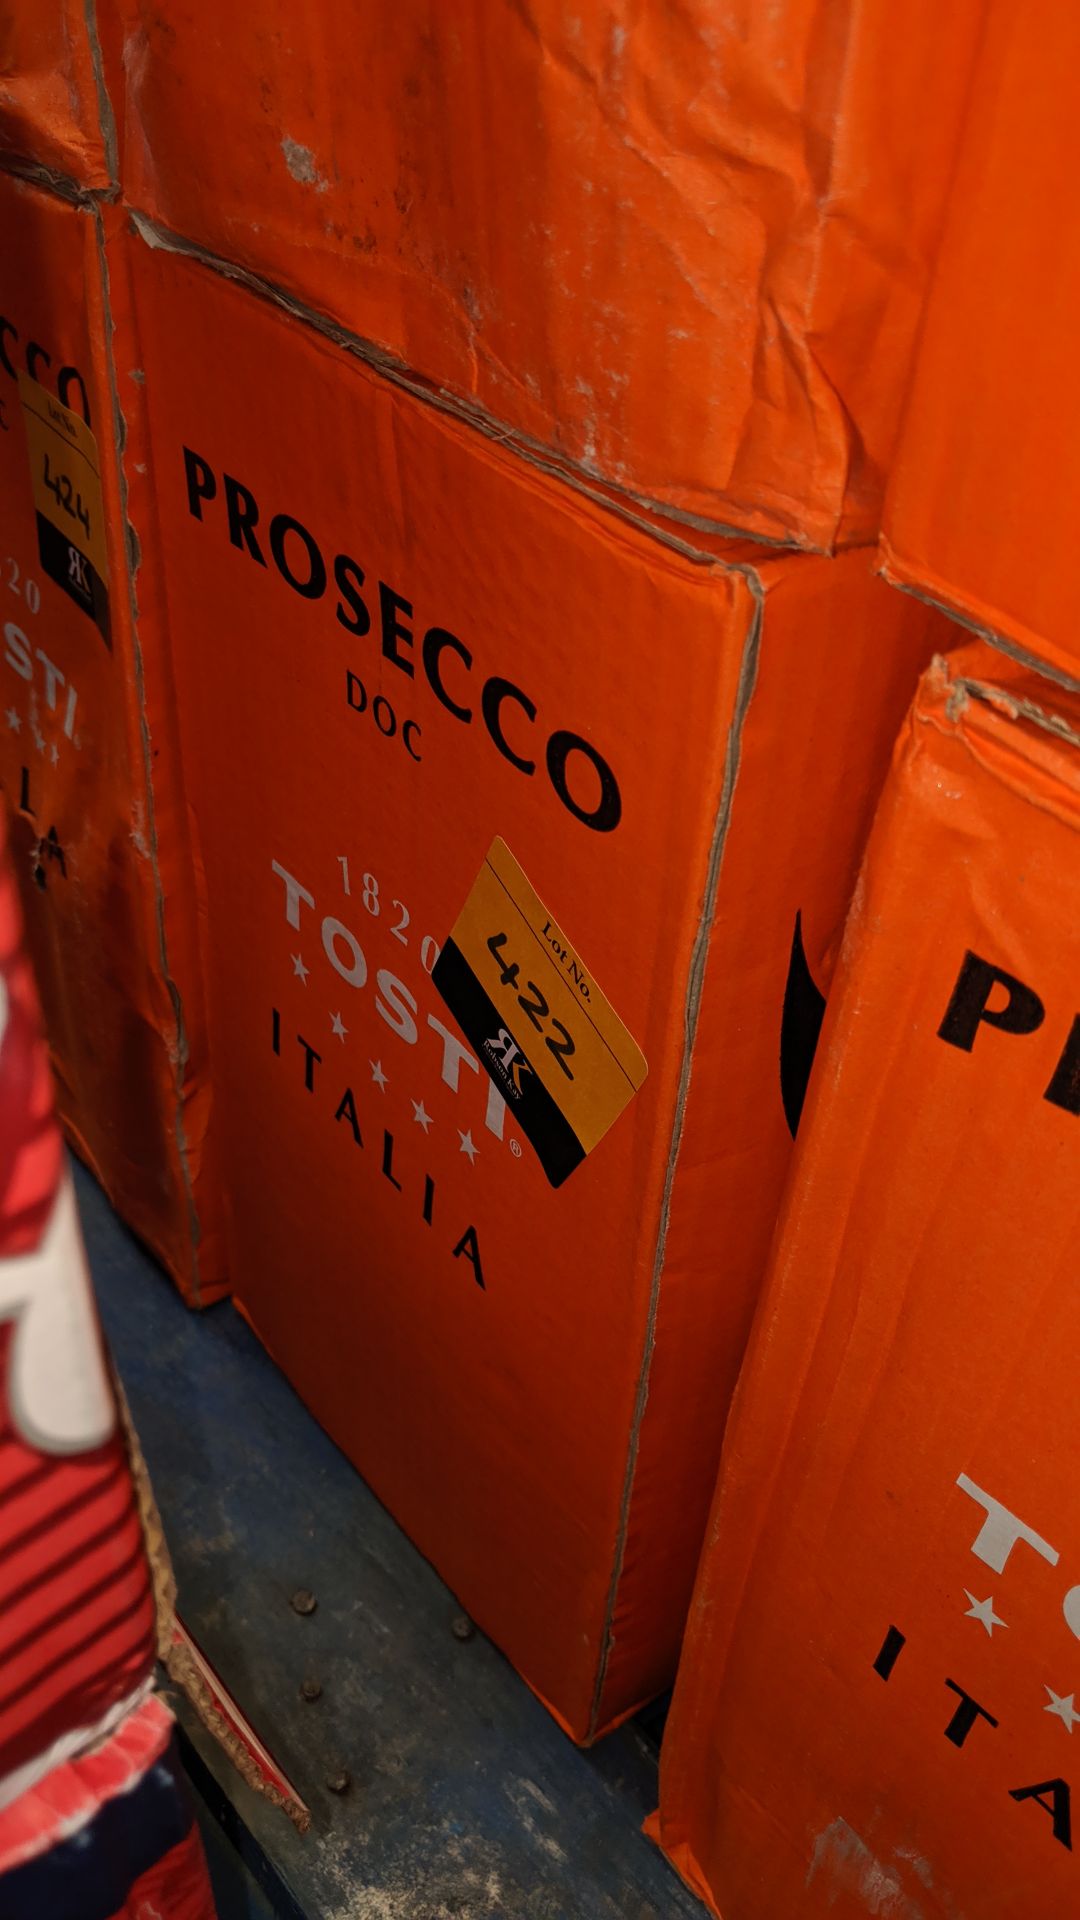 Case of Tosti Prosecco sold under AWRS number XQAW00000101017 - this lot consists of 6 x 75cl